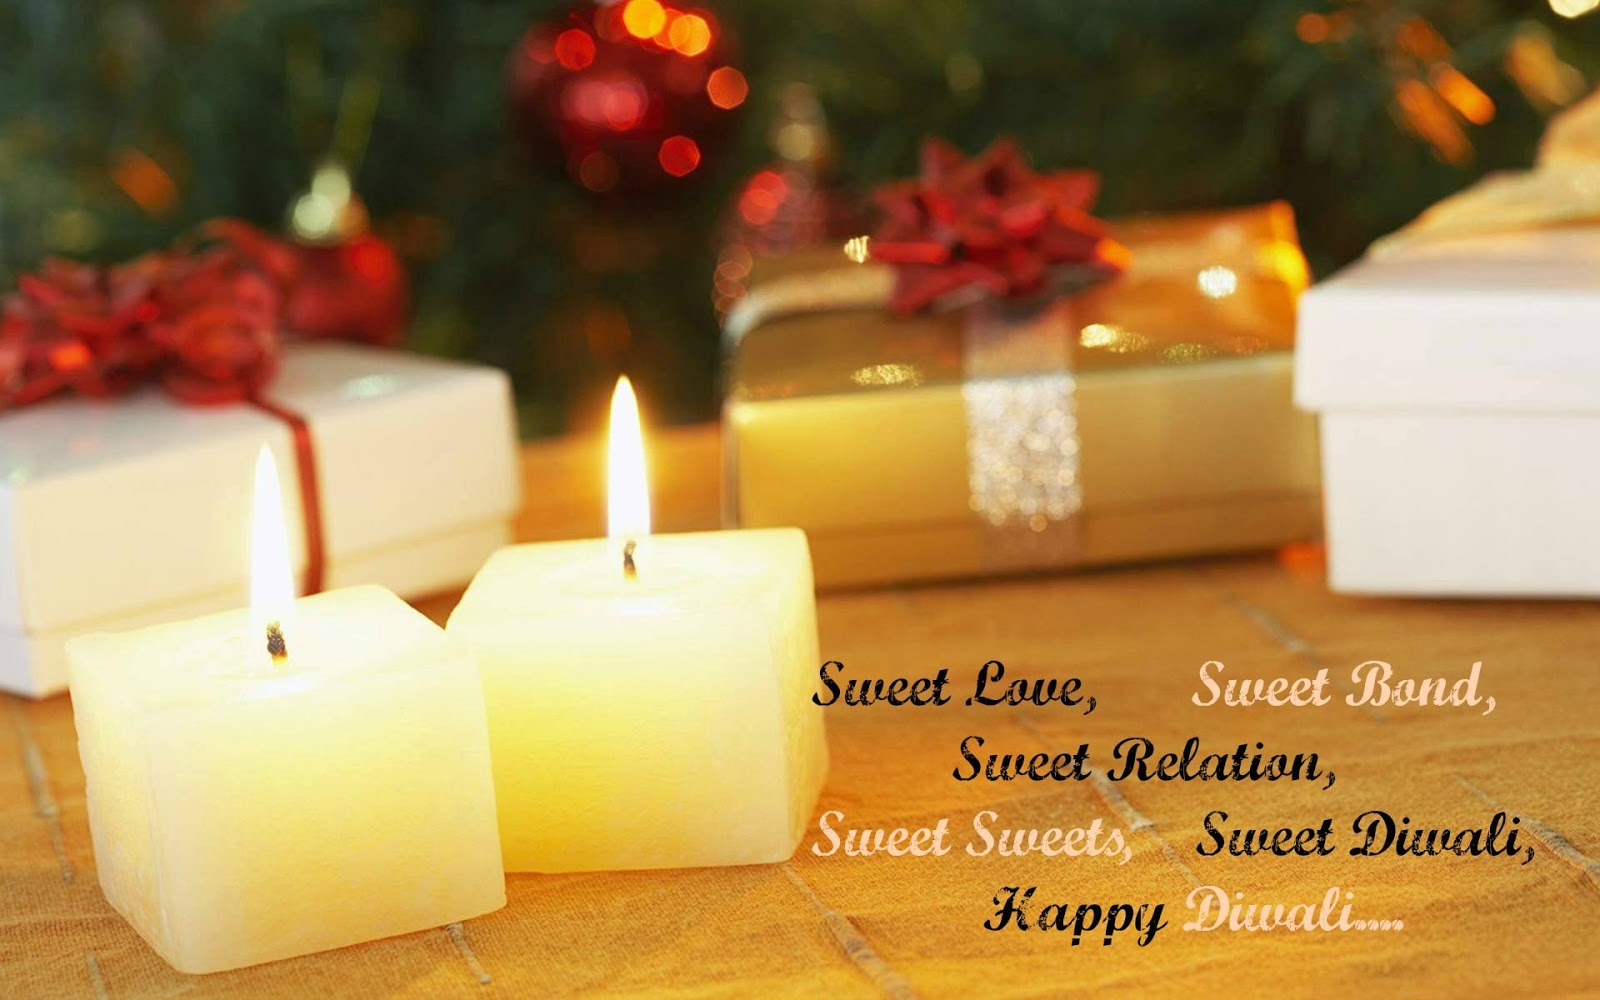 Diwali Best Wishes Wallpaper - Diwali Wishes And Images With Sweets -  1600x1000 Wallpaper 